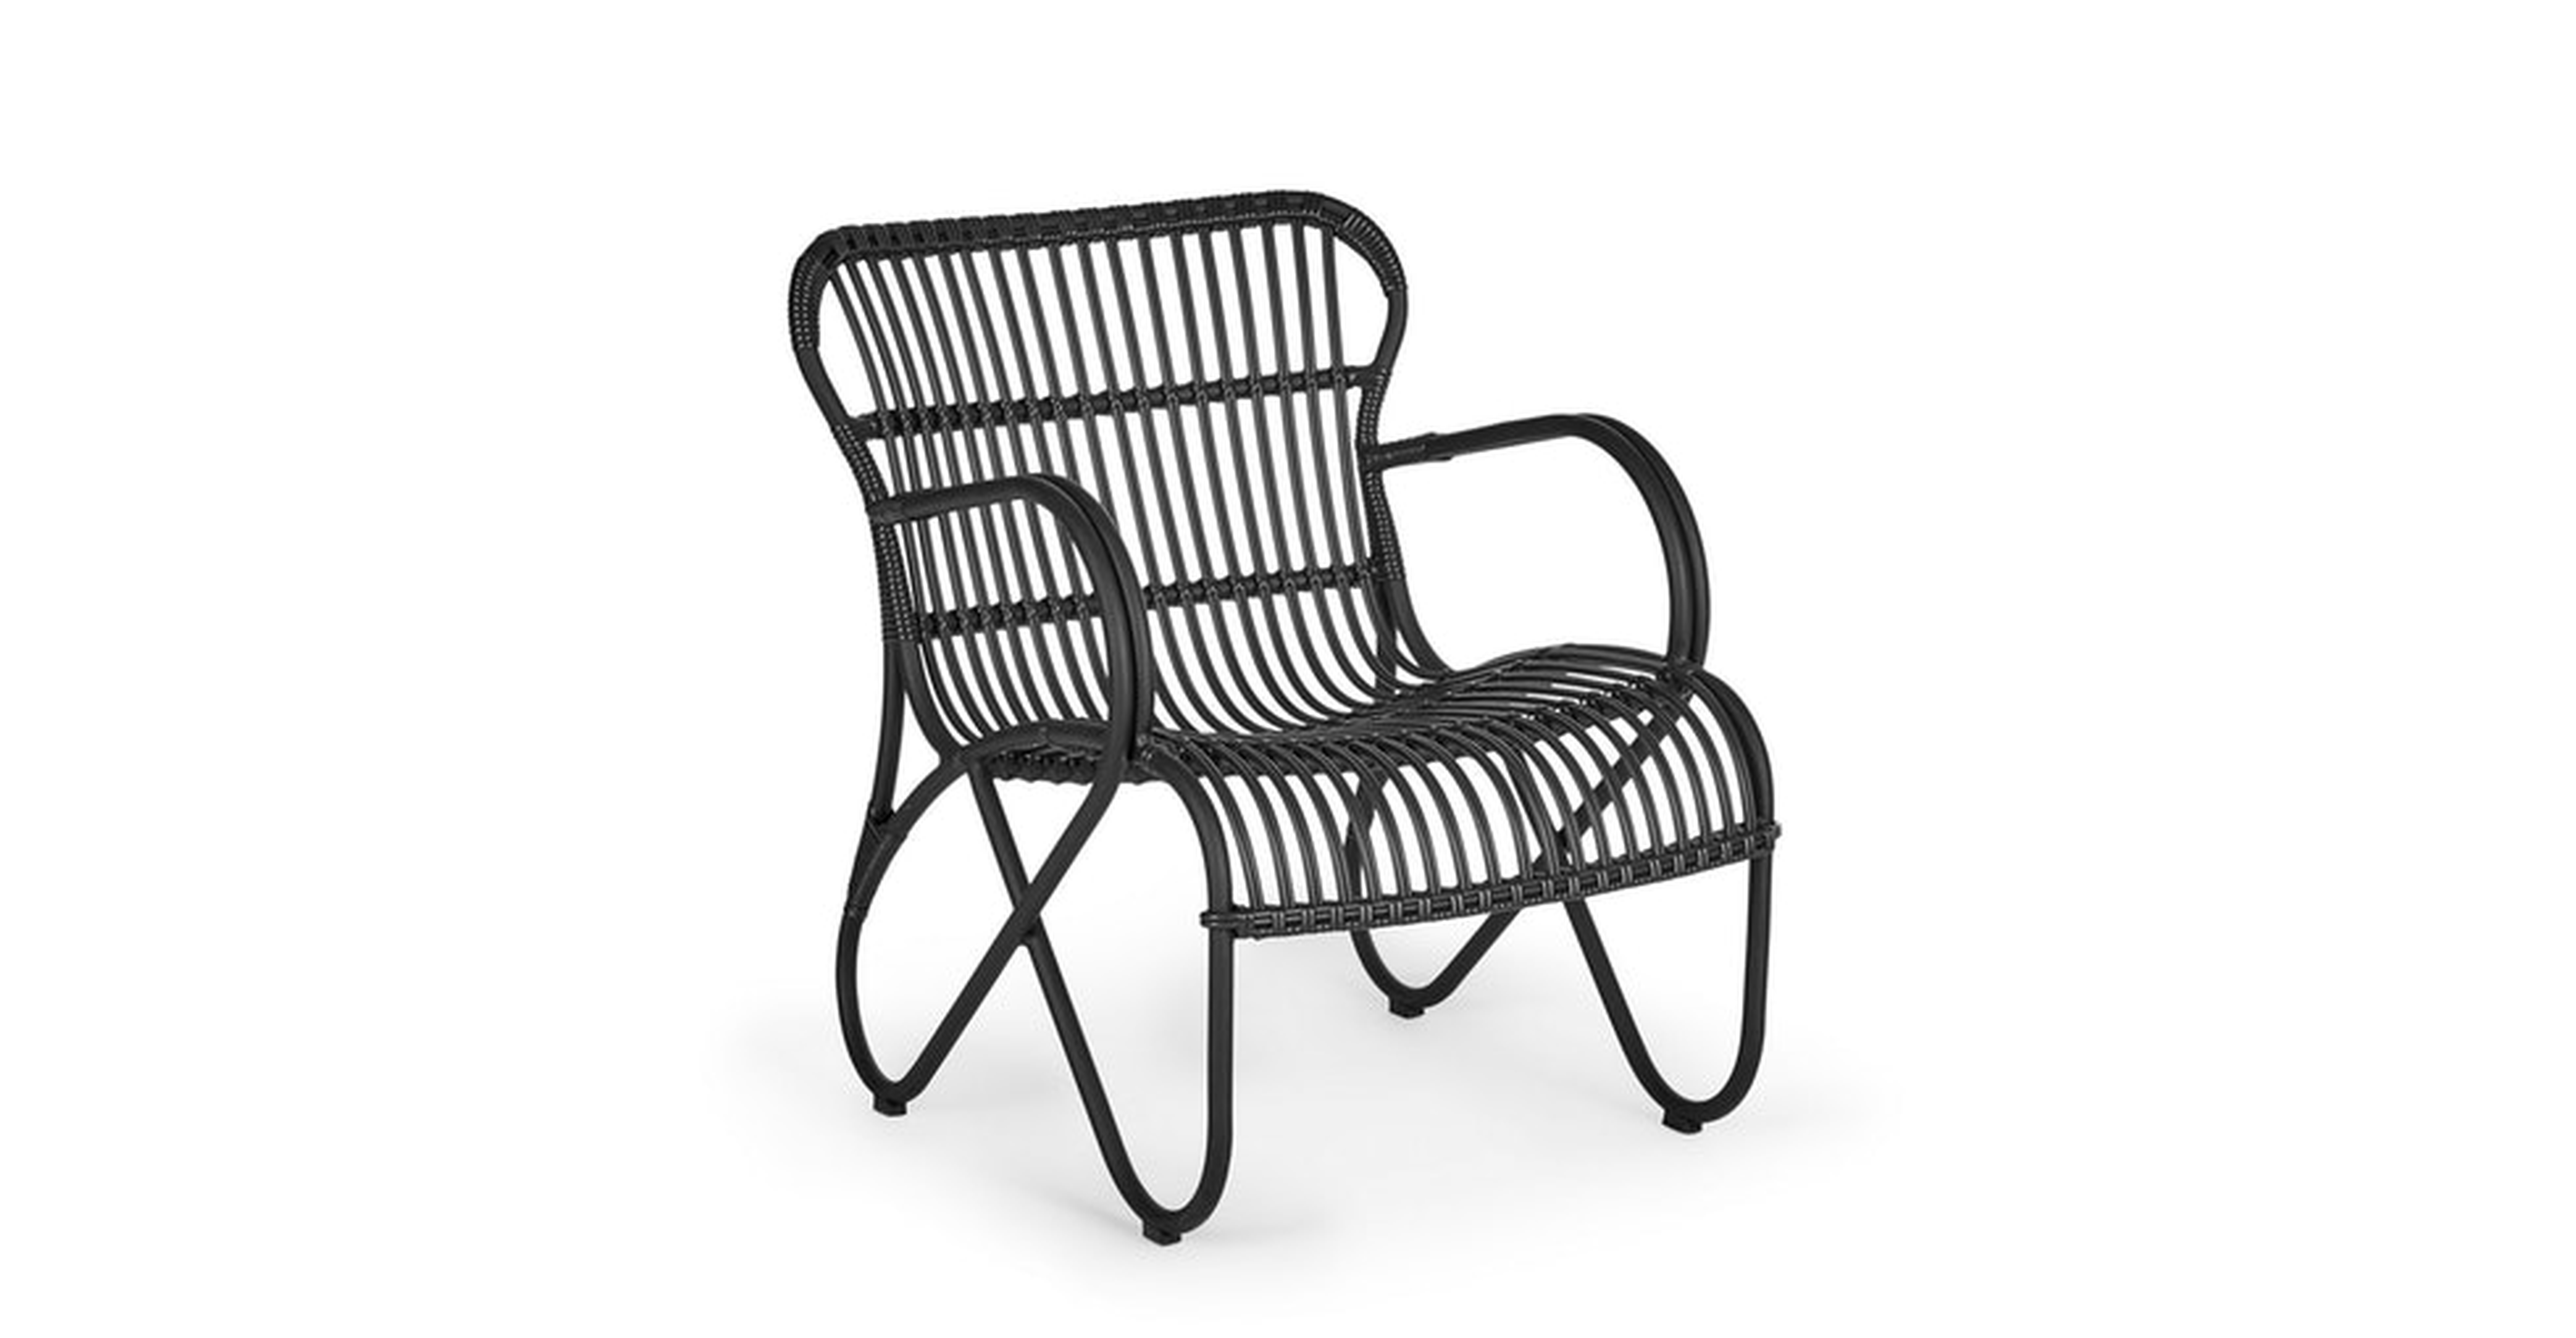 Merle Graphite Lounge Chair - Article